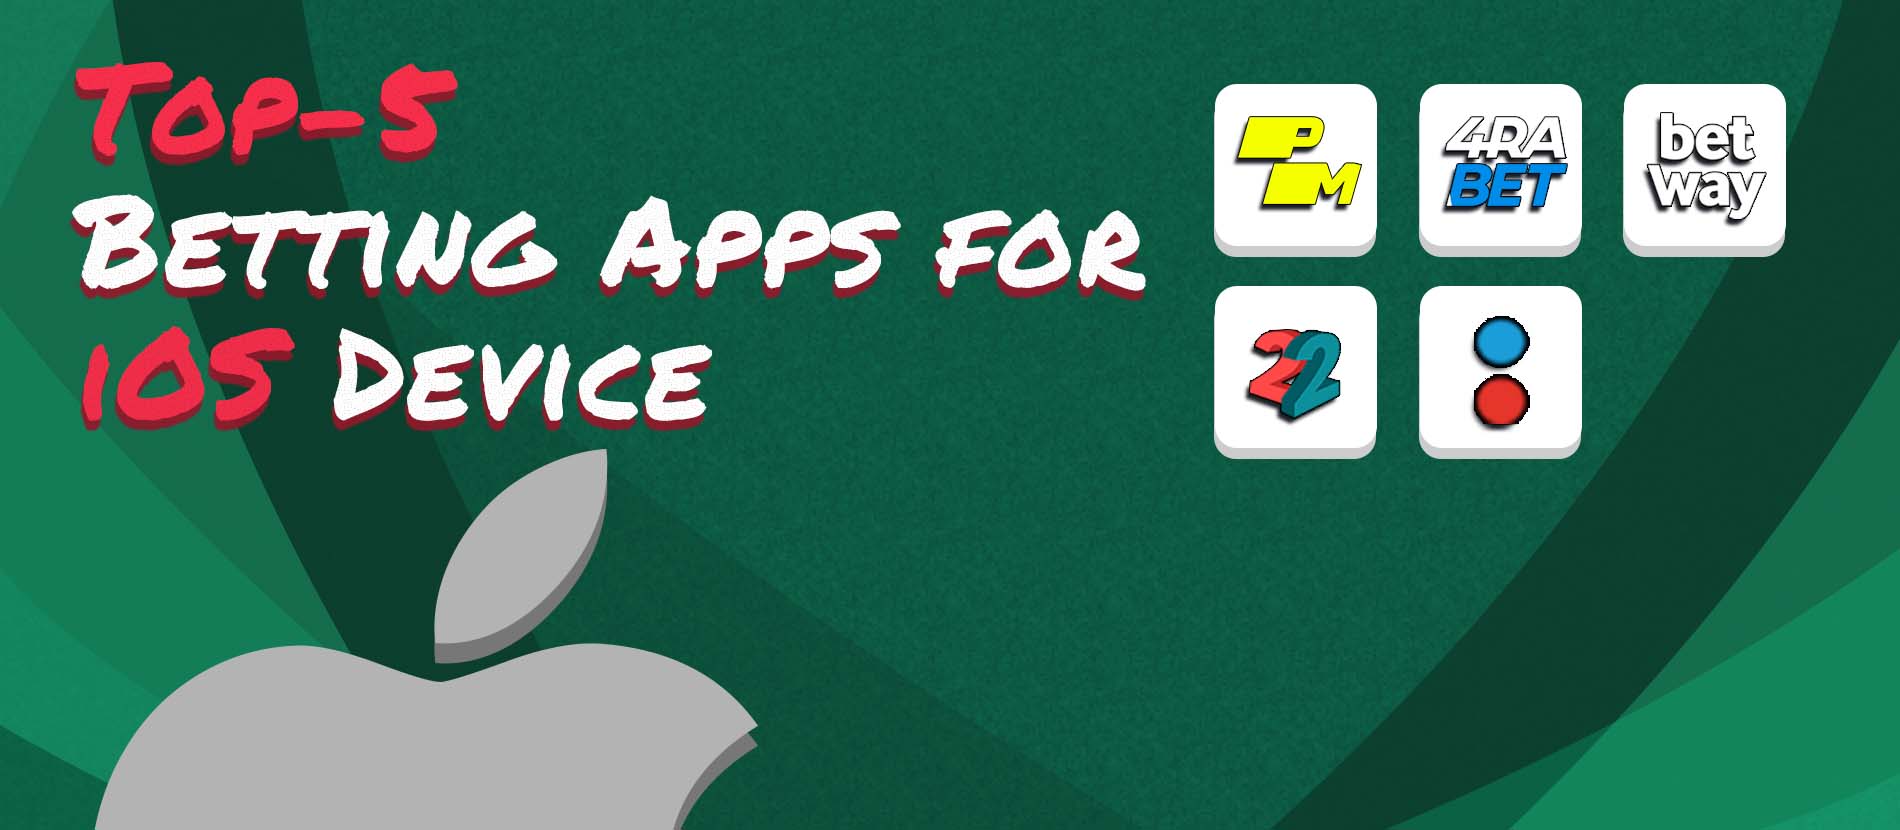 5 betting apps for ios platform in Bangladesh.